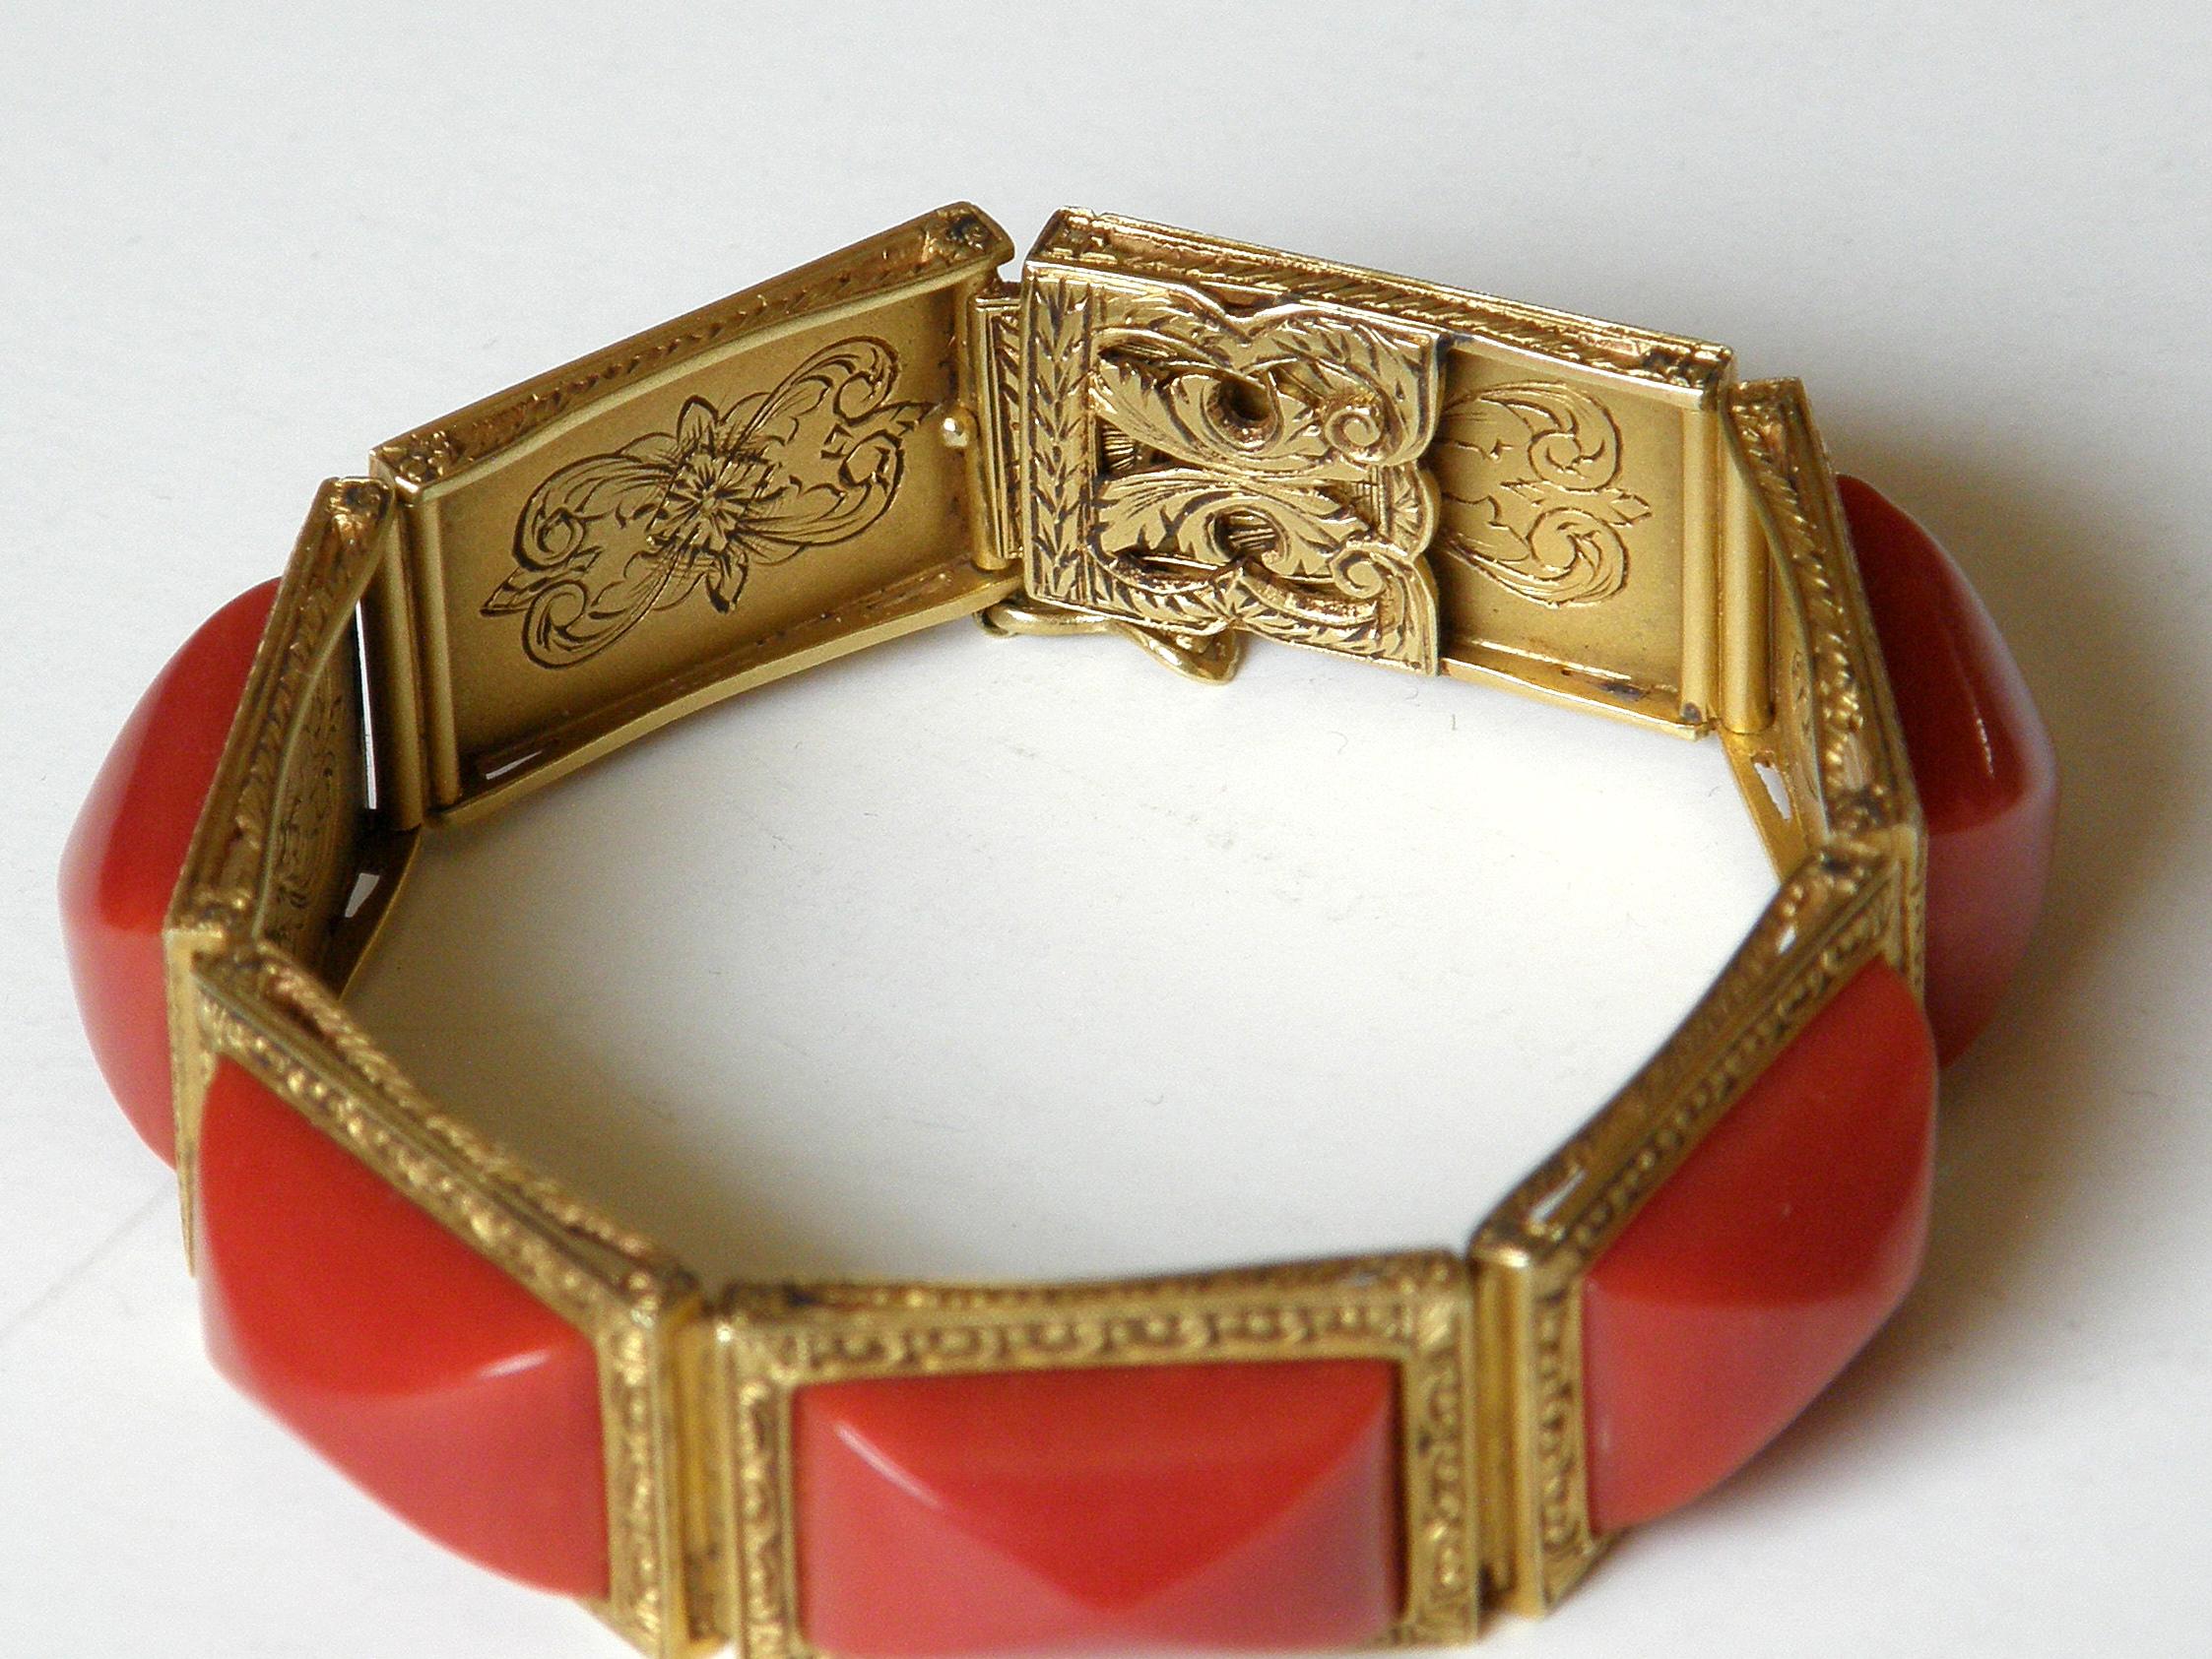 17K Gold Link Bracelet with Floral Engraving and Pyramid Cabochon Stones In Good Condition For Sale In Chicago, IL